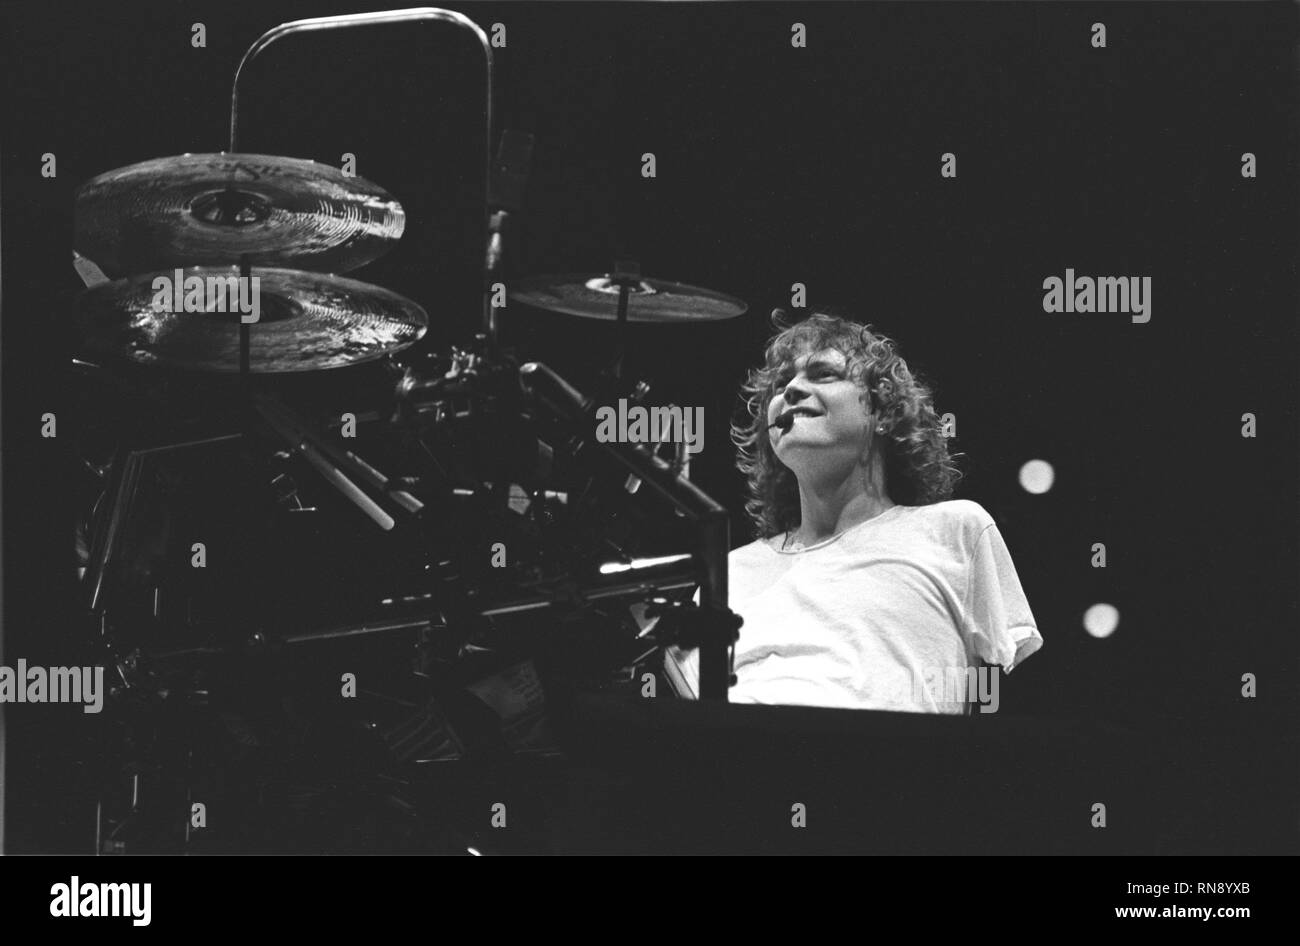 Def Leppard drummer Rick Allen is shown performing on stage during a concert appearance. Stock Photo